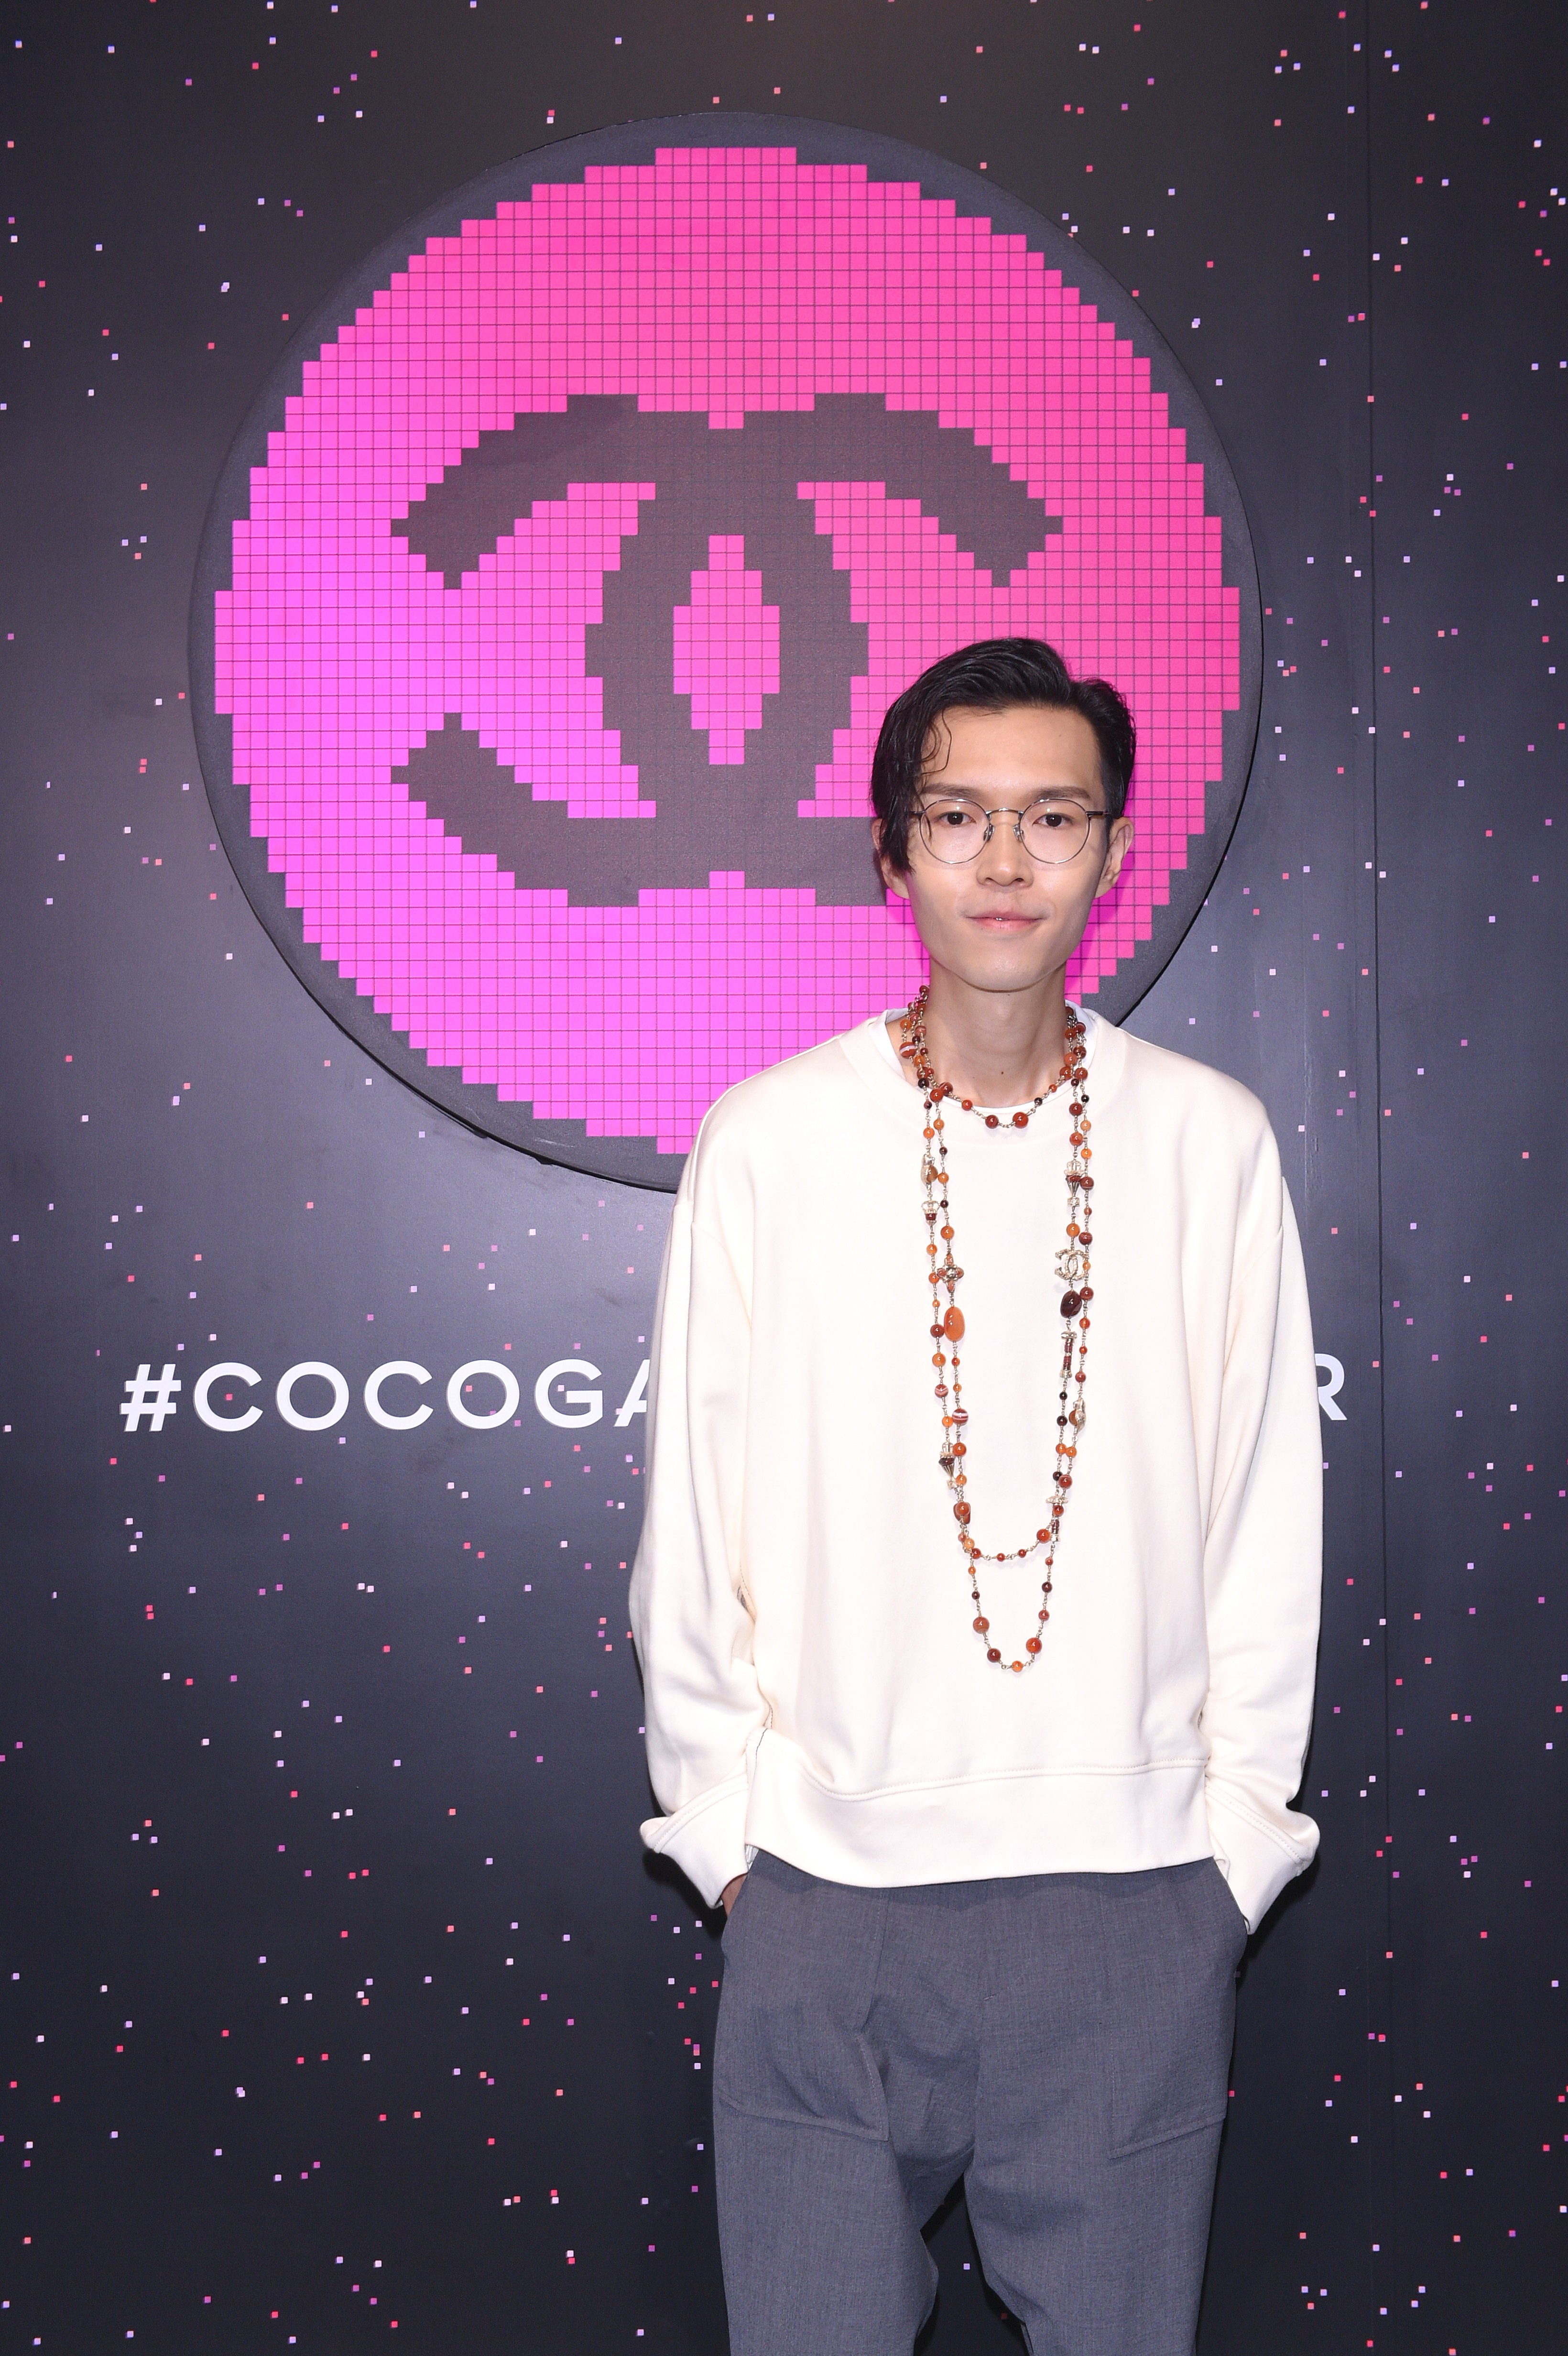 Playful Chanel opens Coco Game Center, its innovative beauty pop